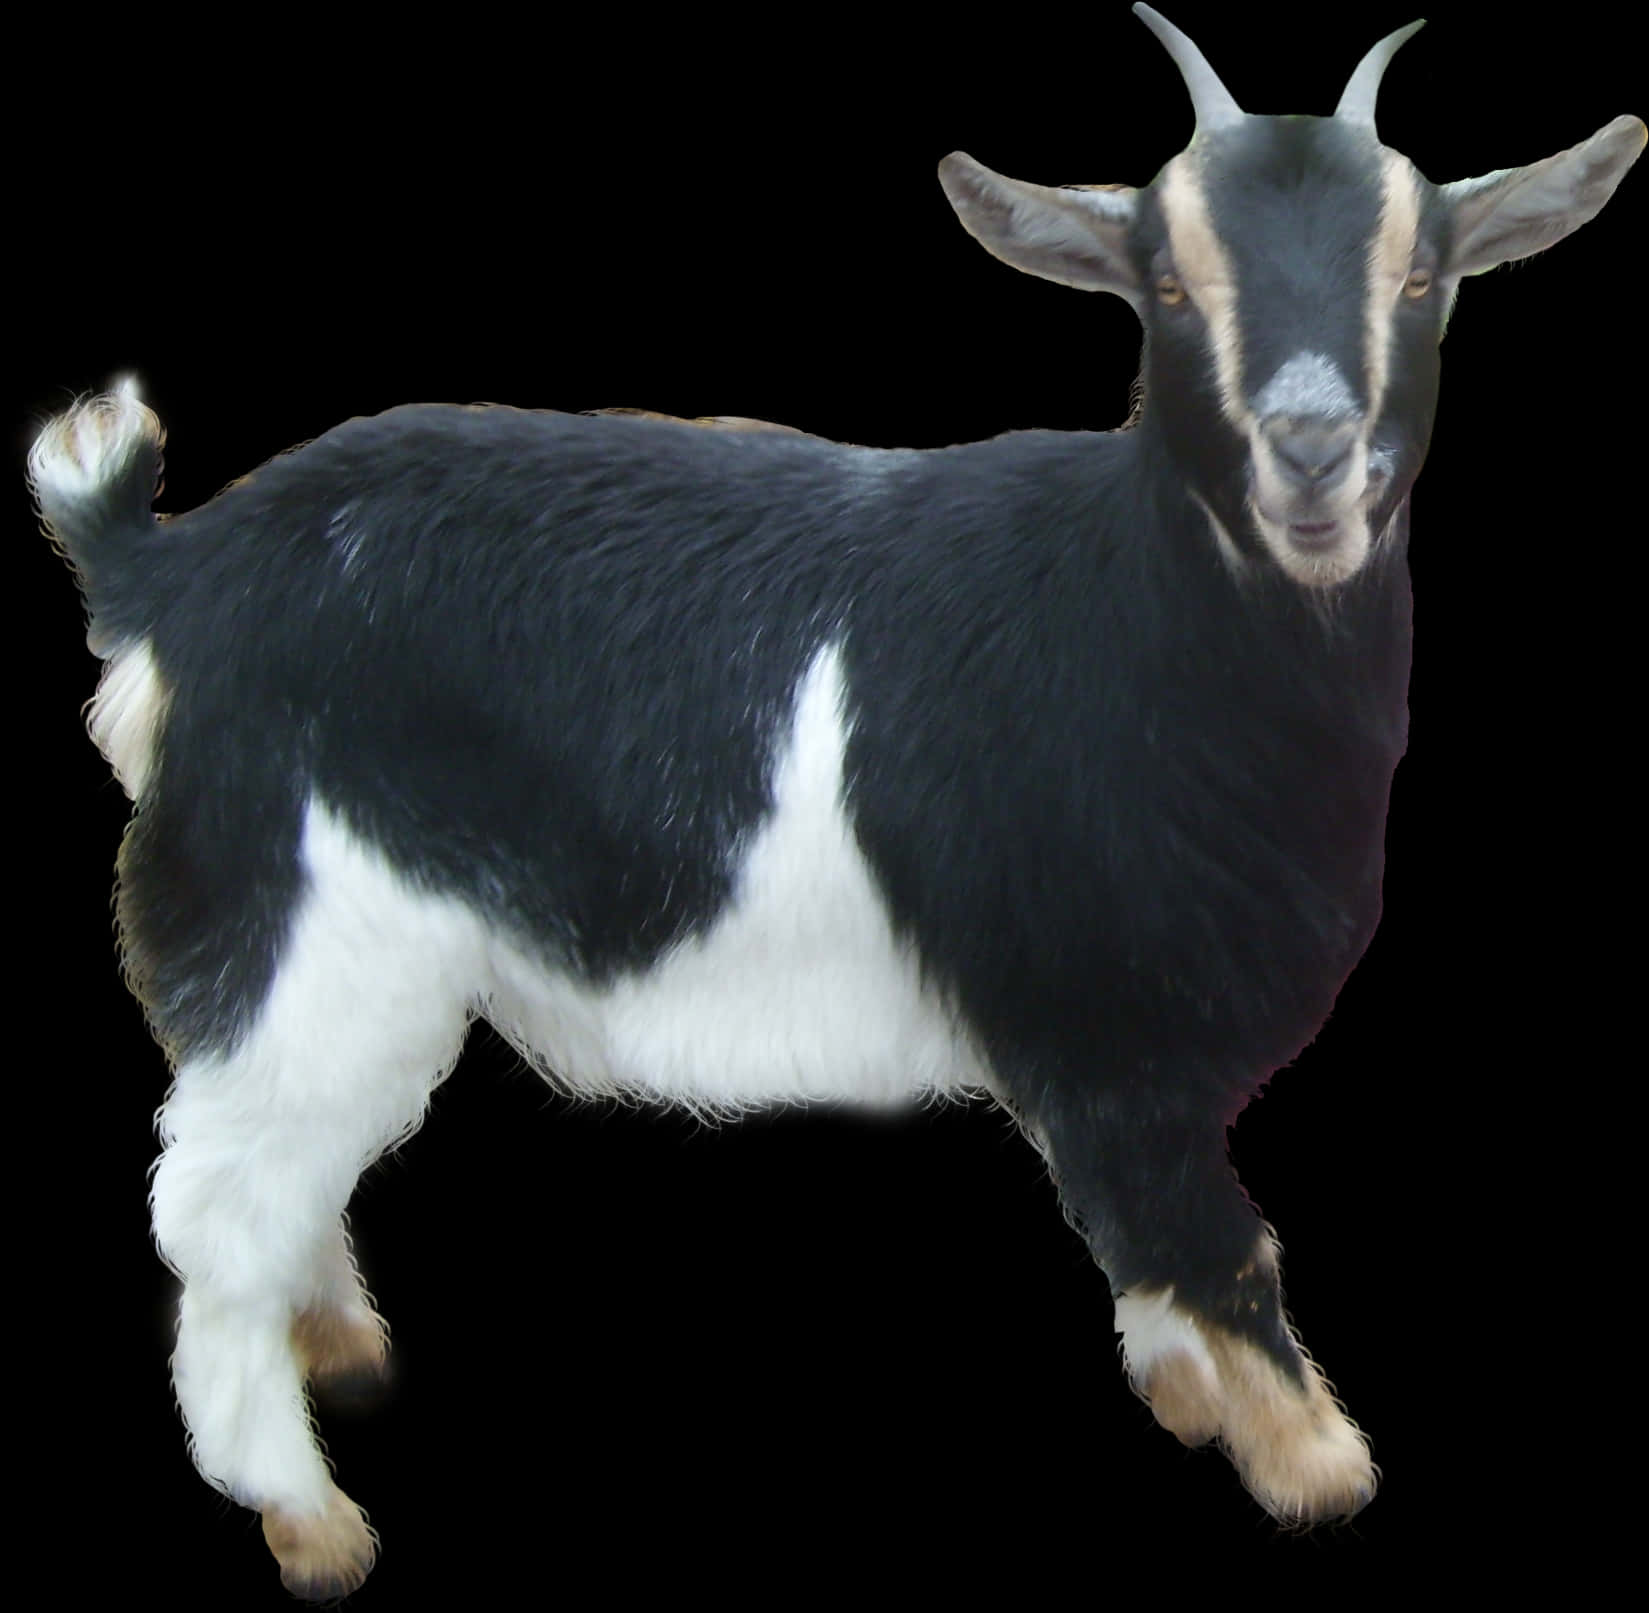 A Black And White Goat With Horns